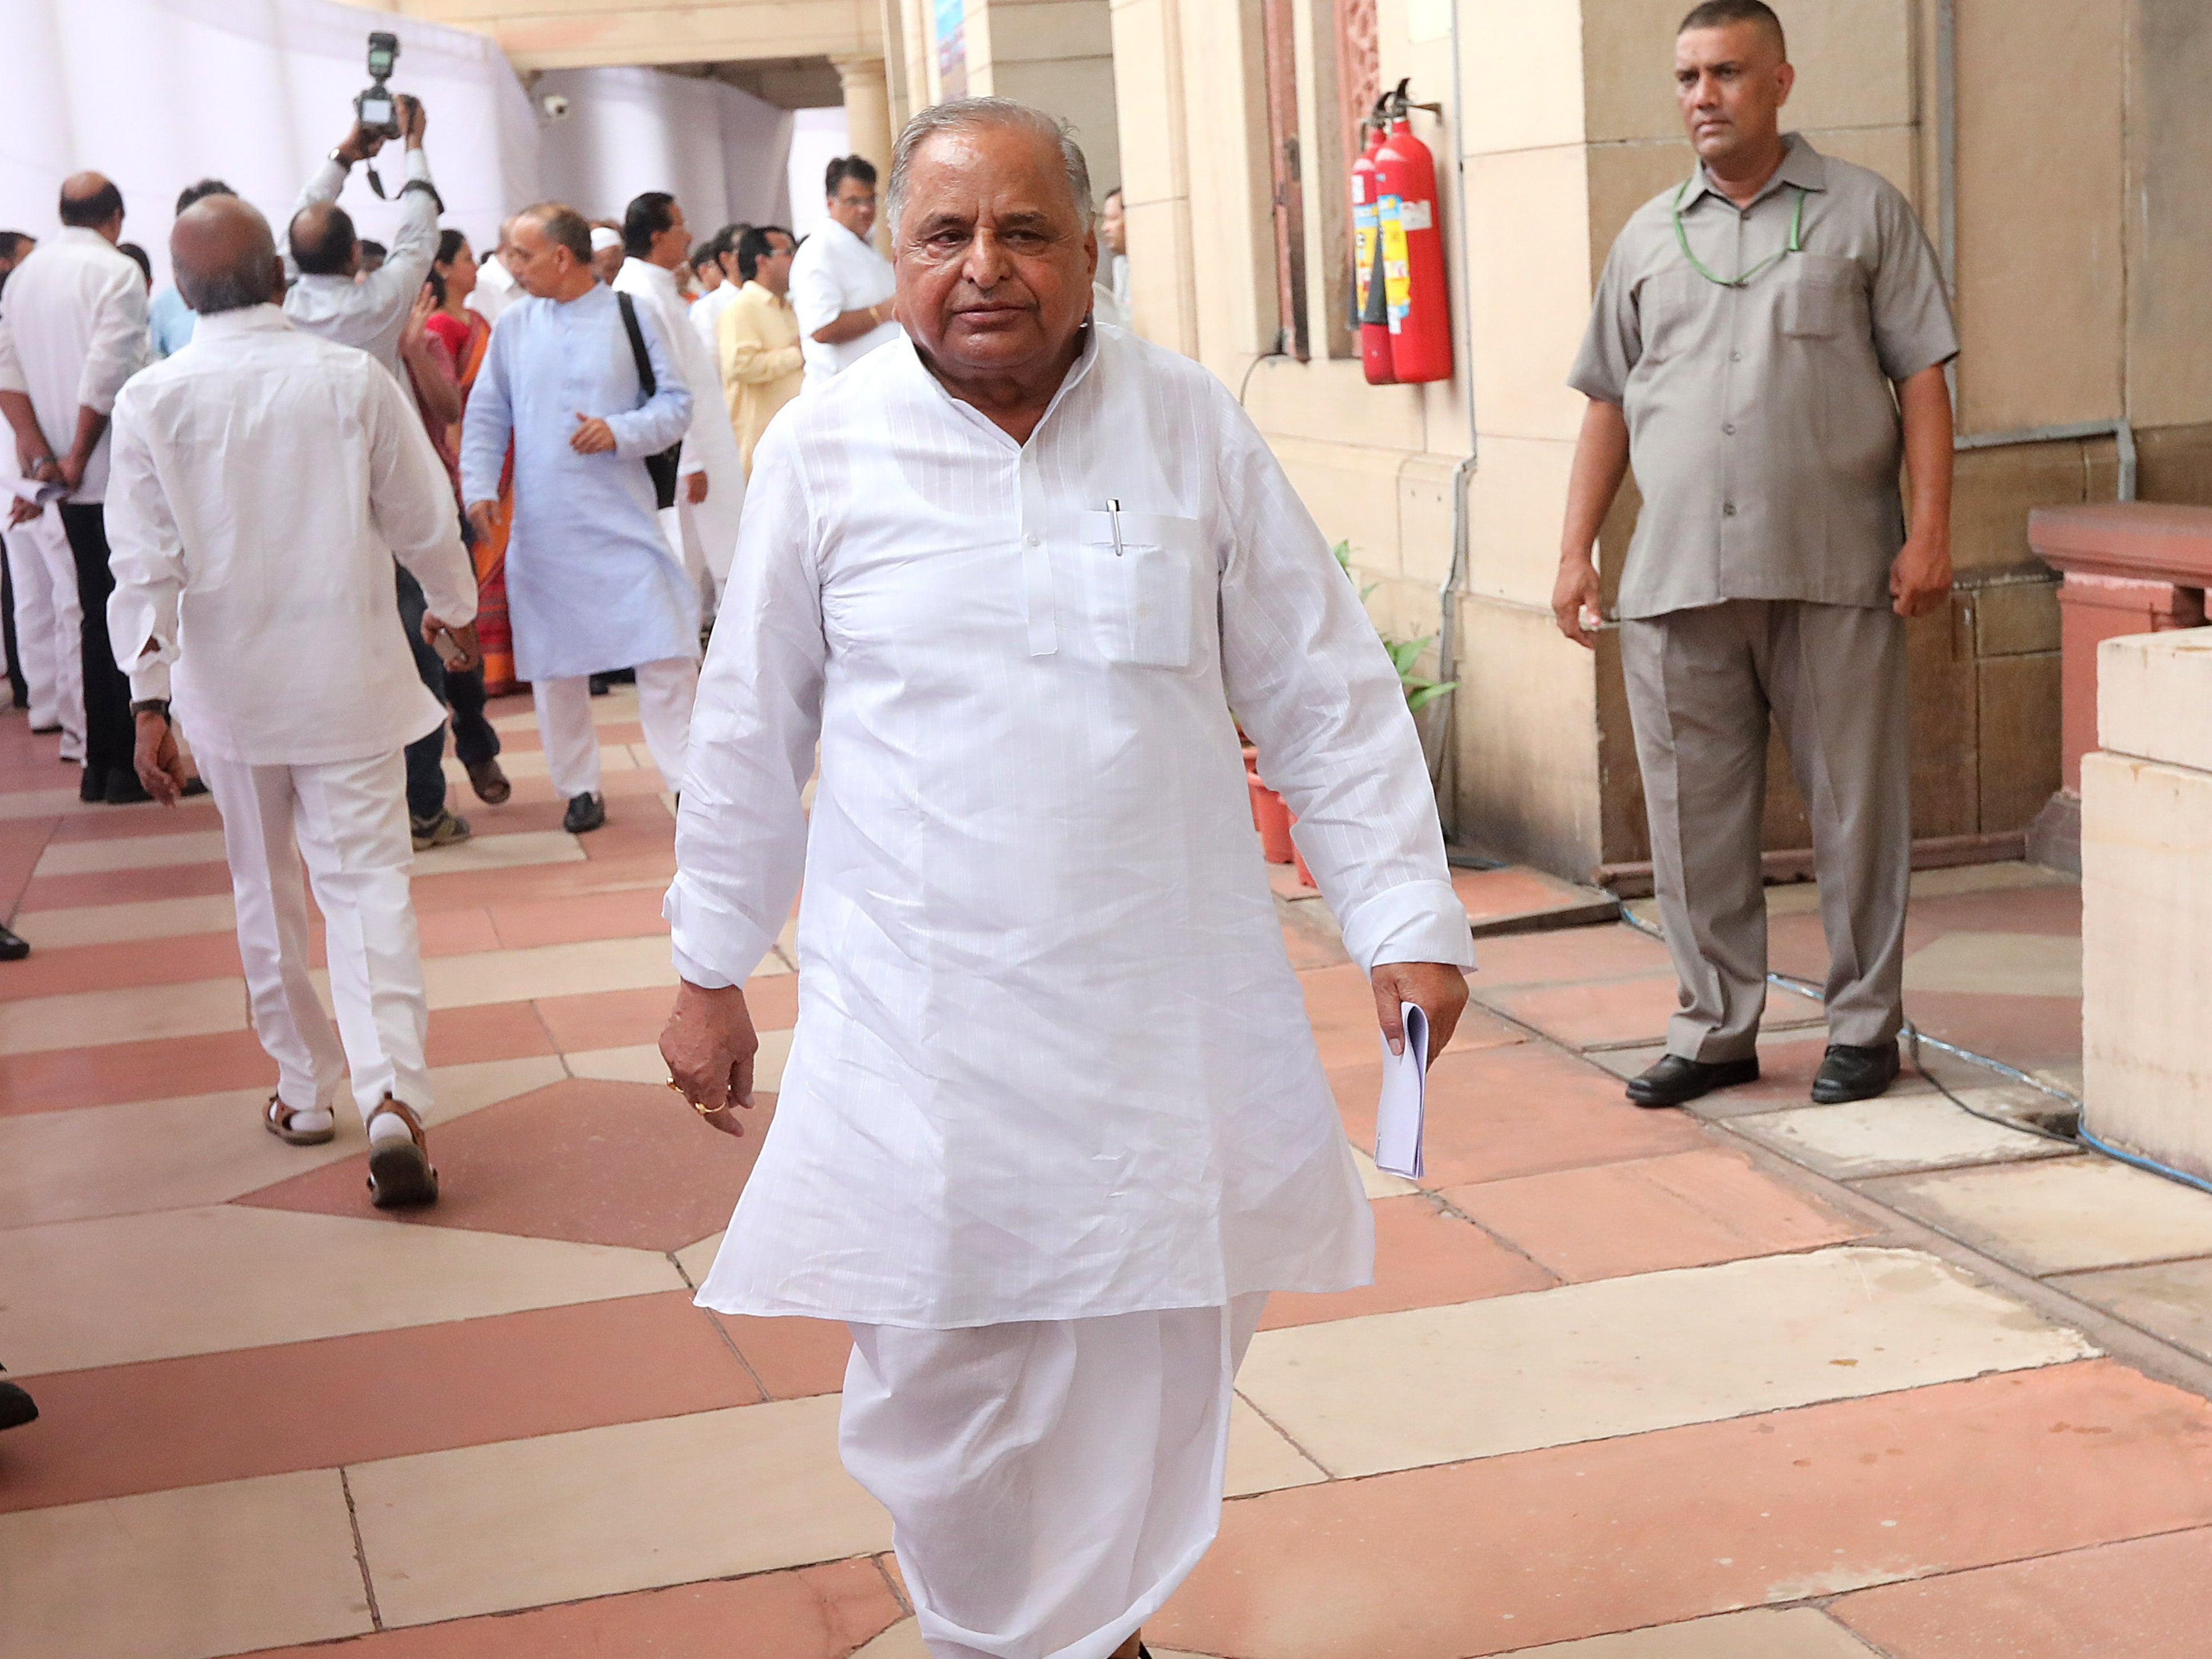 India’s former defense minister and a veteran socialist leader, Mulayam Singh Yadav died in a hospital on Monday after a prolonged illness. He was 82.